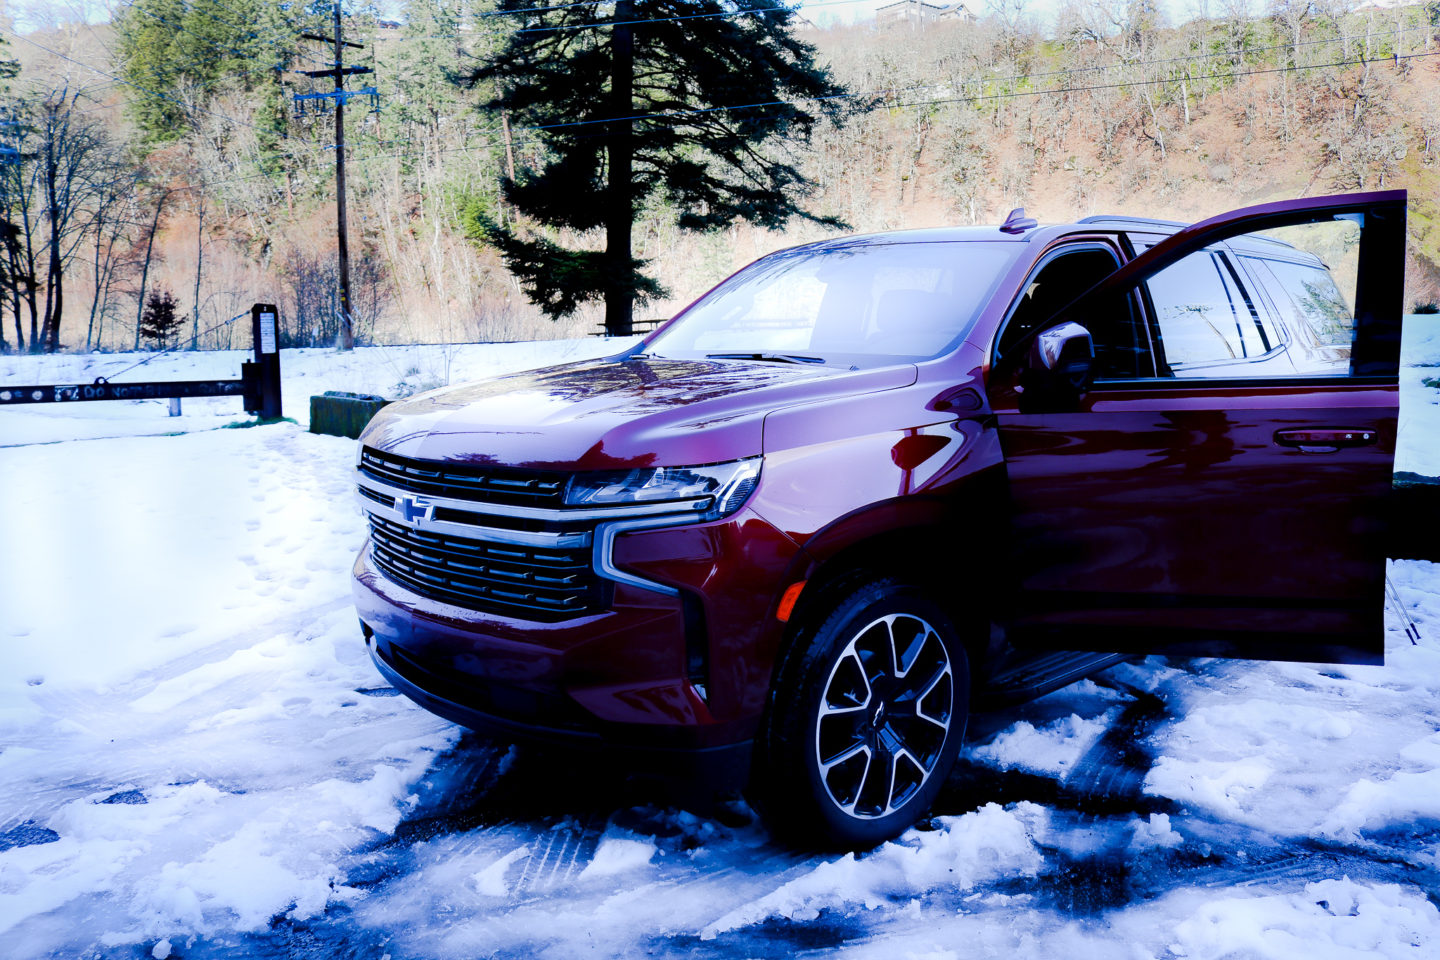 2021 Chevy Tahoe RST Exterior in Snow
A Safe Winter Getaway Trip to Hood River Oregon